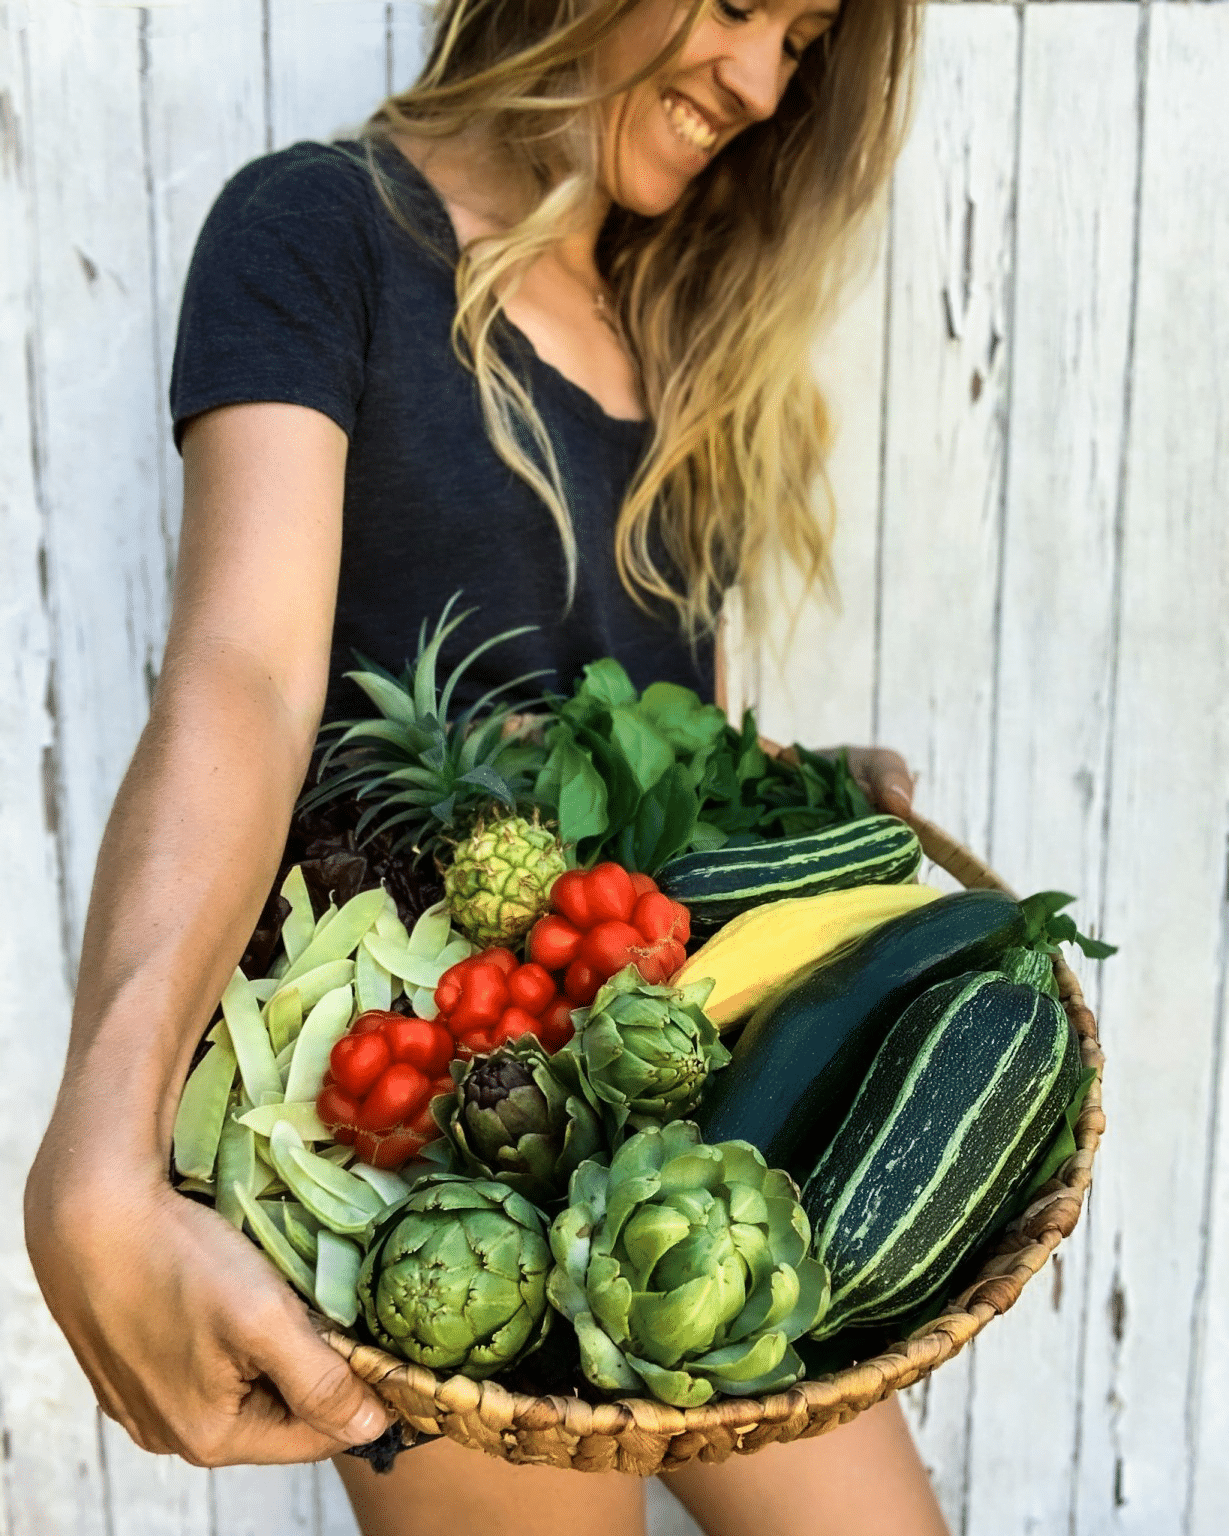 Lucy Hutchings – also known as @shegrowsveg on Instagram